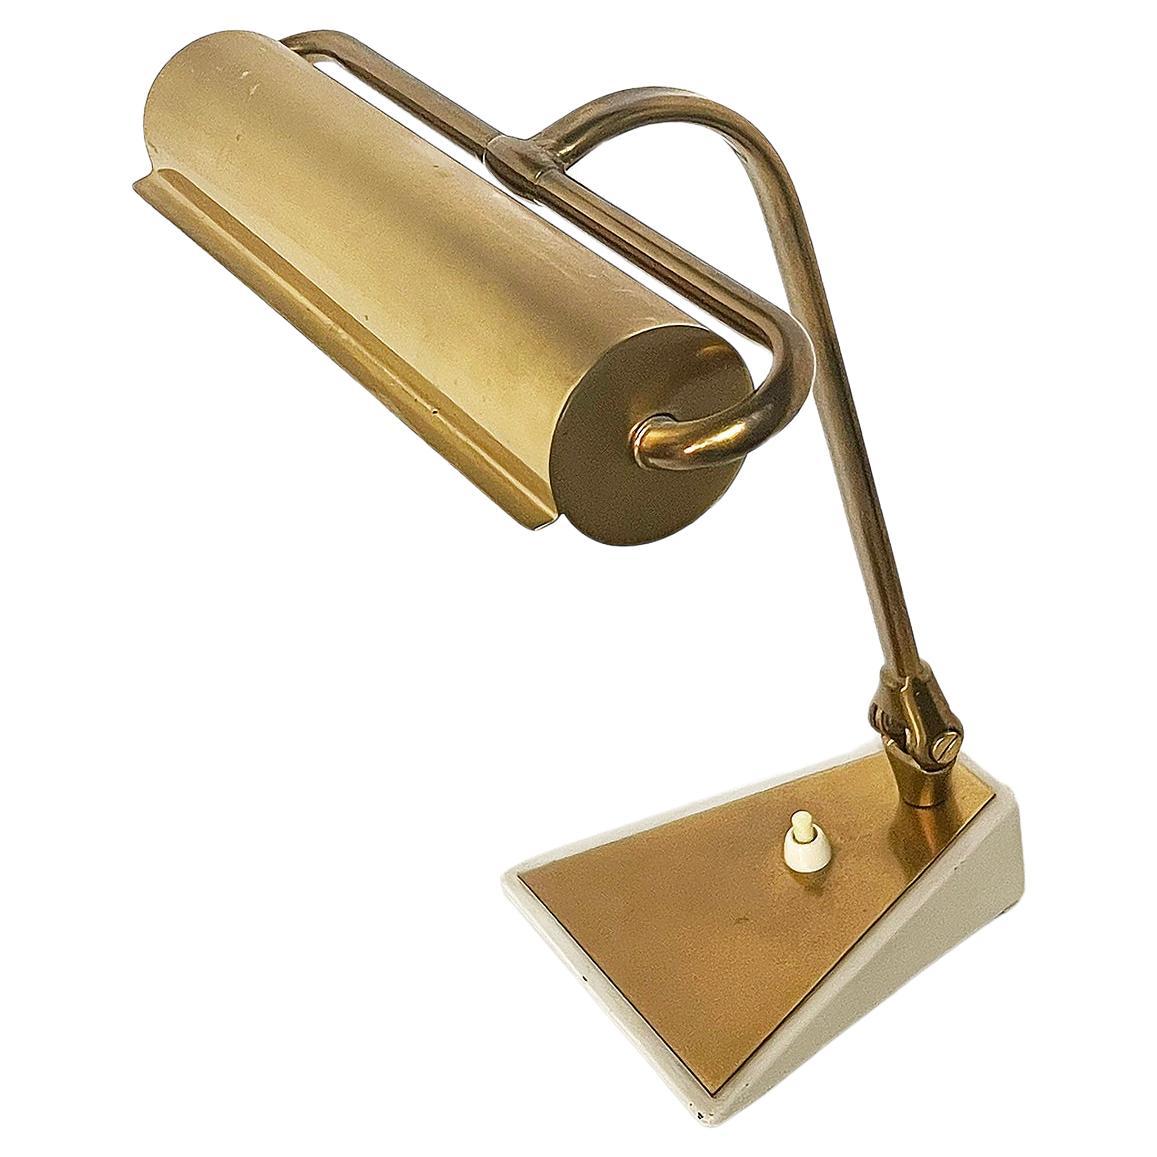 Scandinavian Modern Table Lamp in Brass by Boréns ca 1950-1960's For Sale